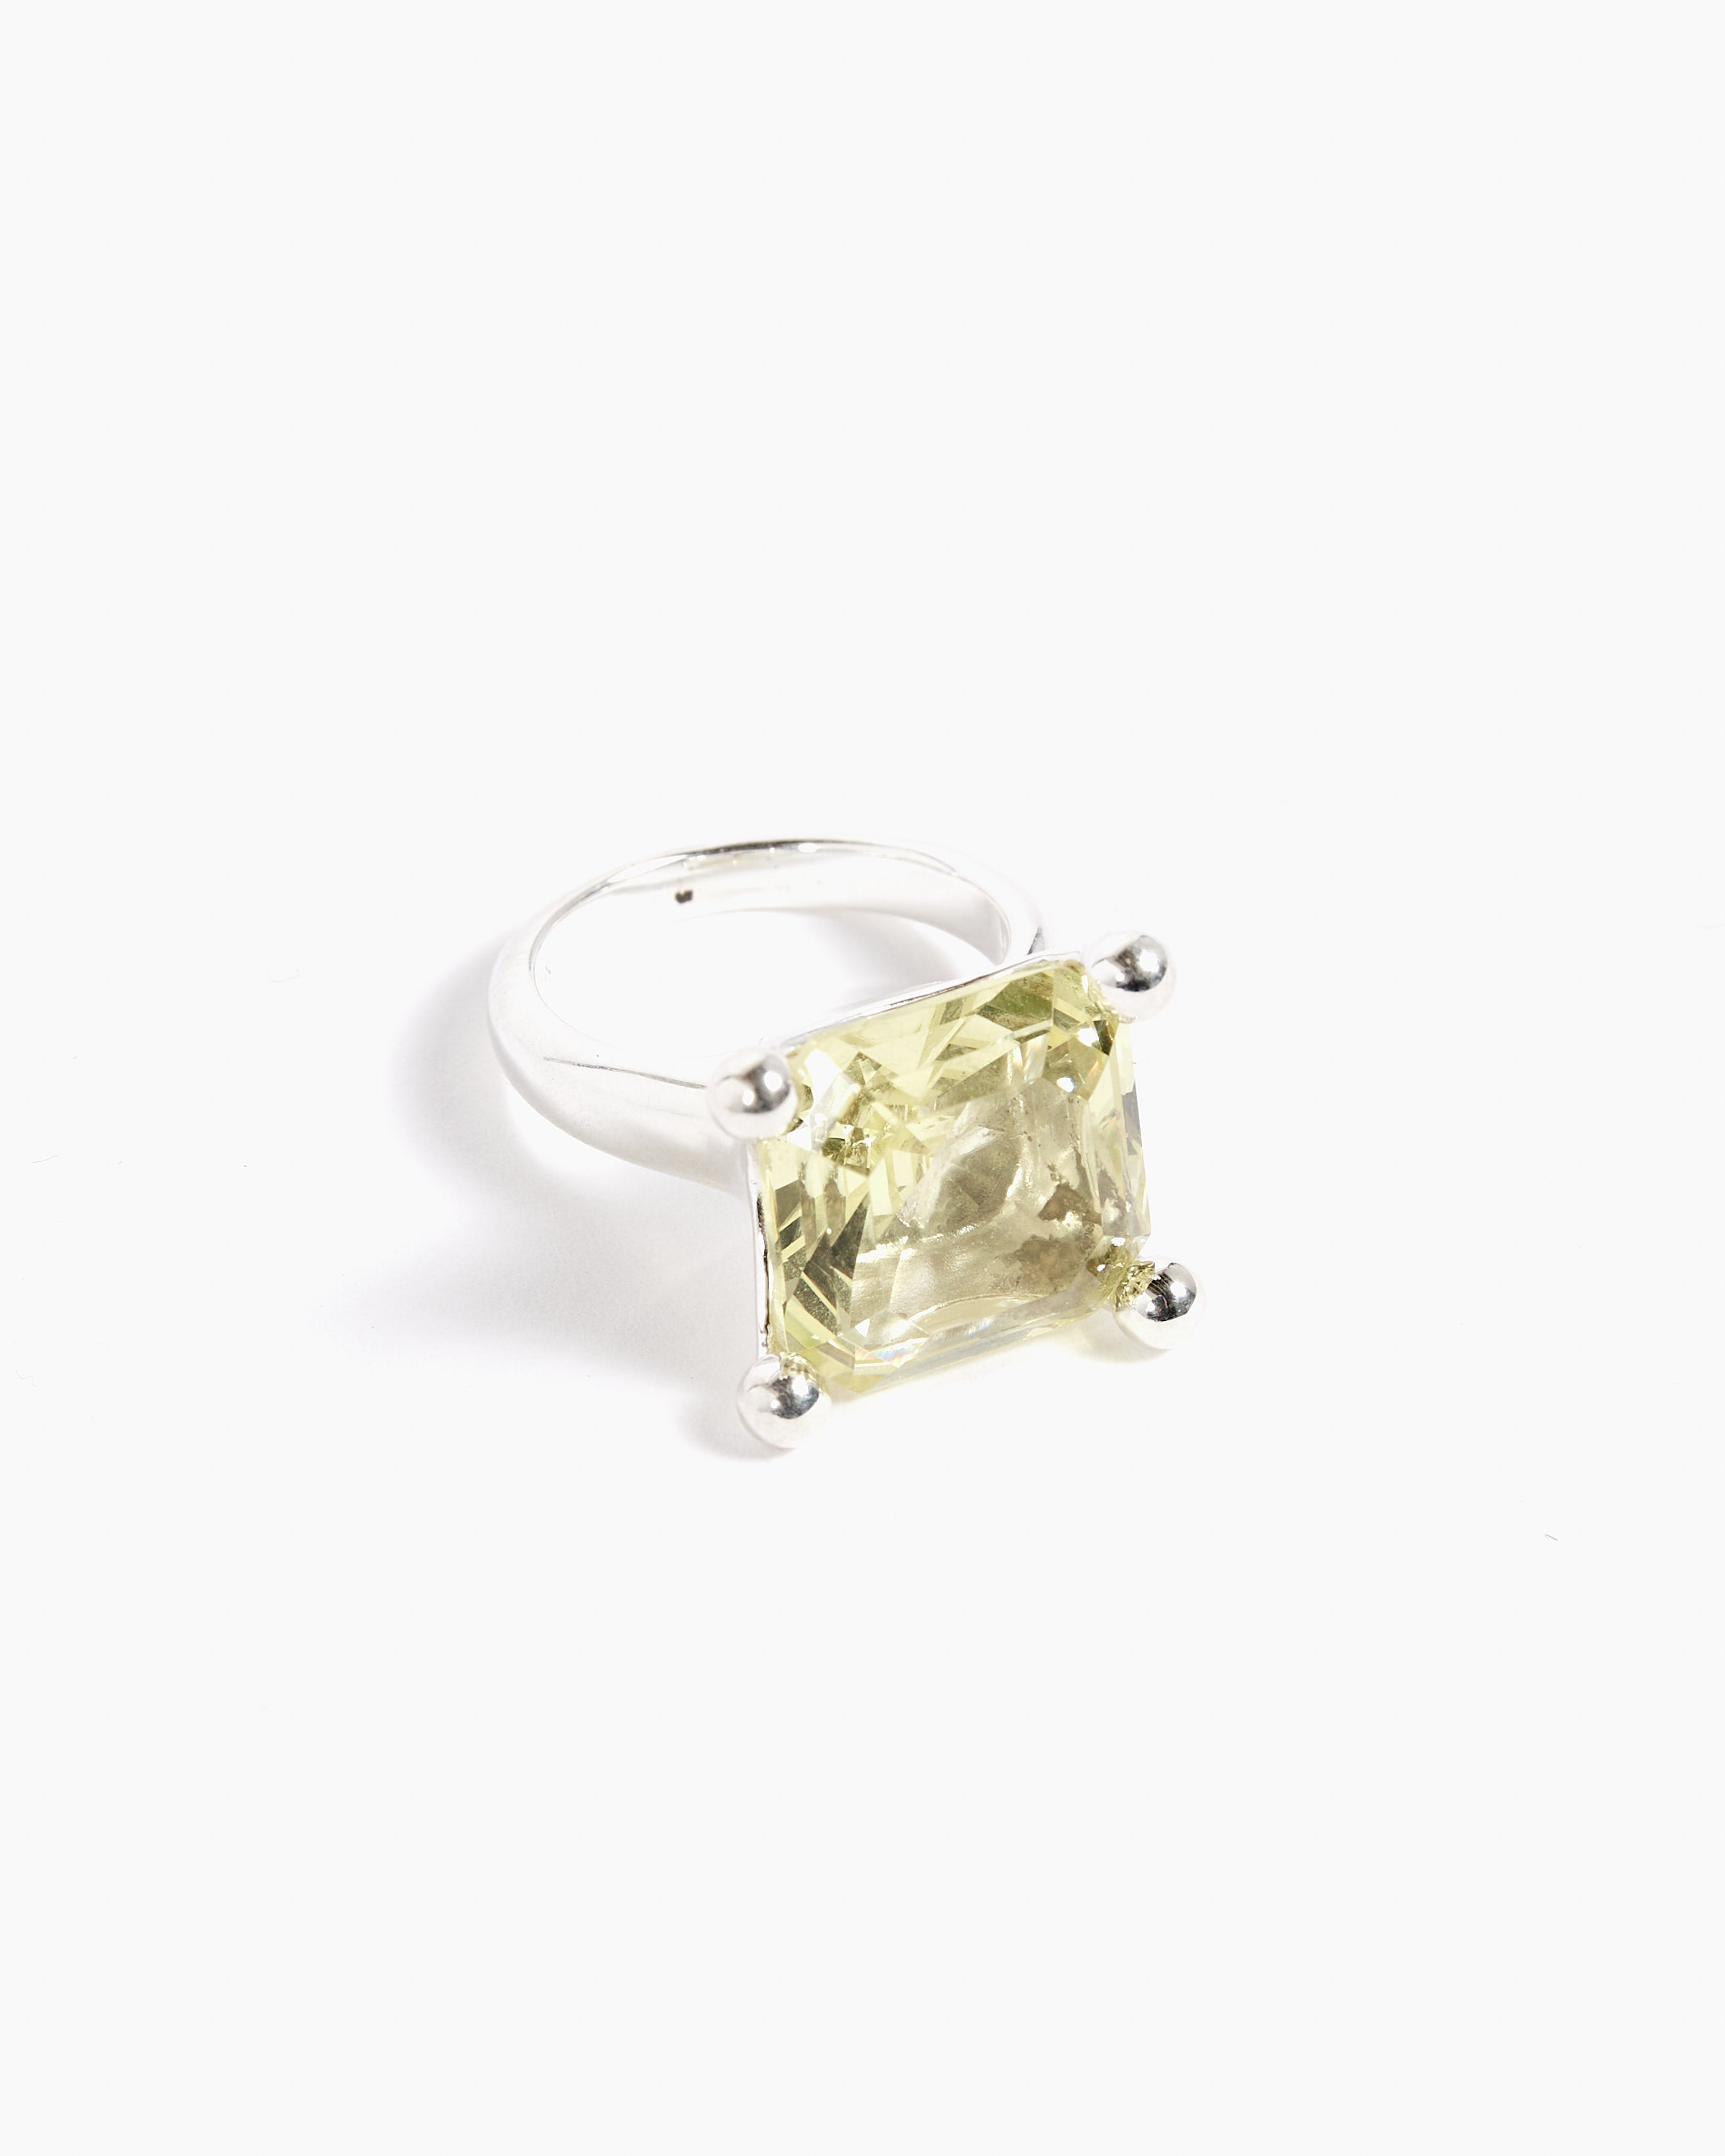 Atomic Square Ring in Limoncello